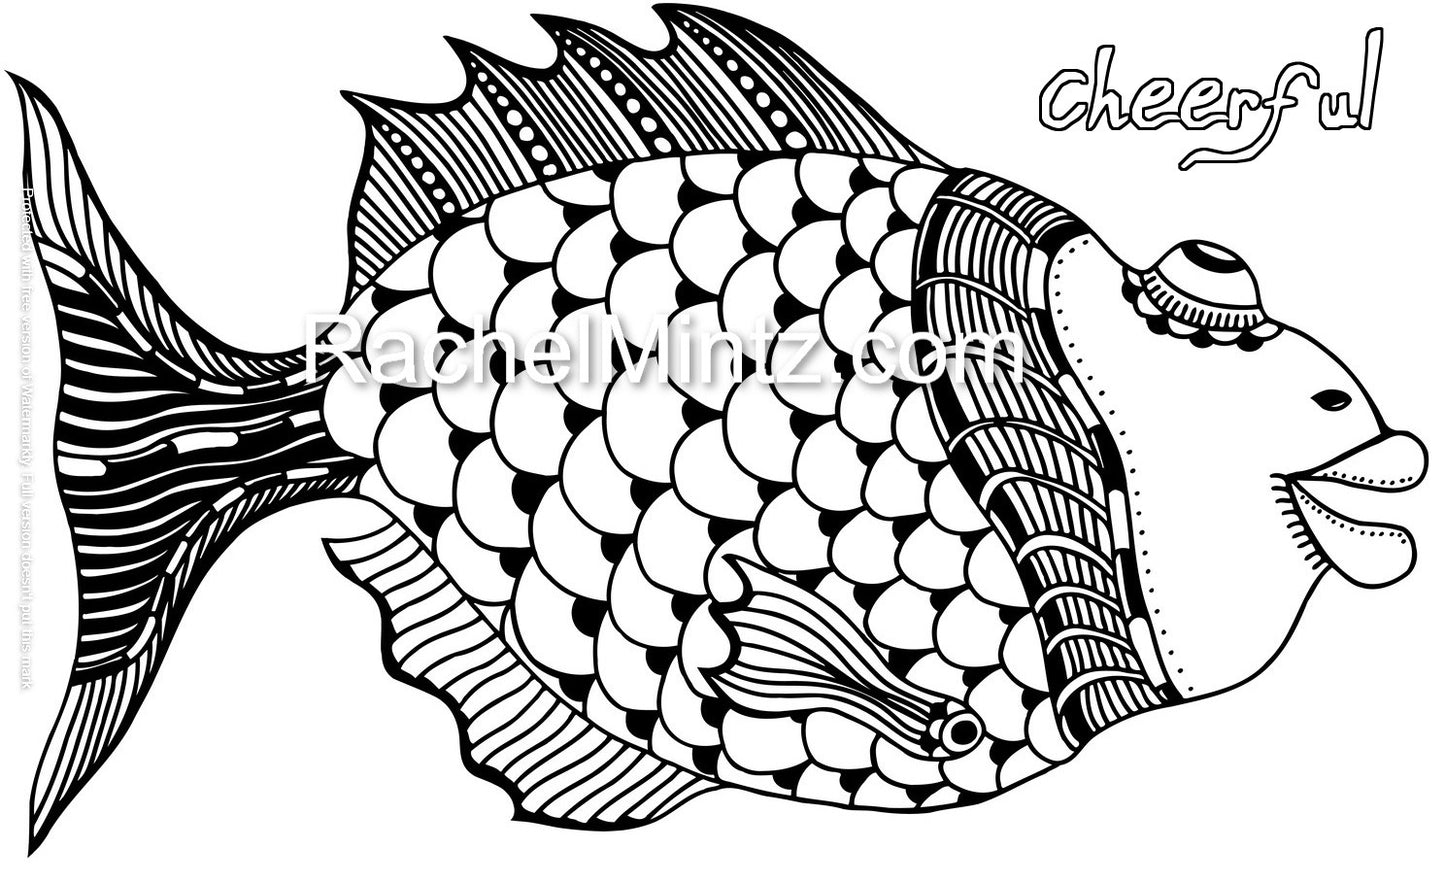 Doodle Fish - Easy Designs for Relaxation and Mind Clearing Moments (Printable Format) Coloring Book